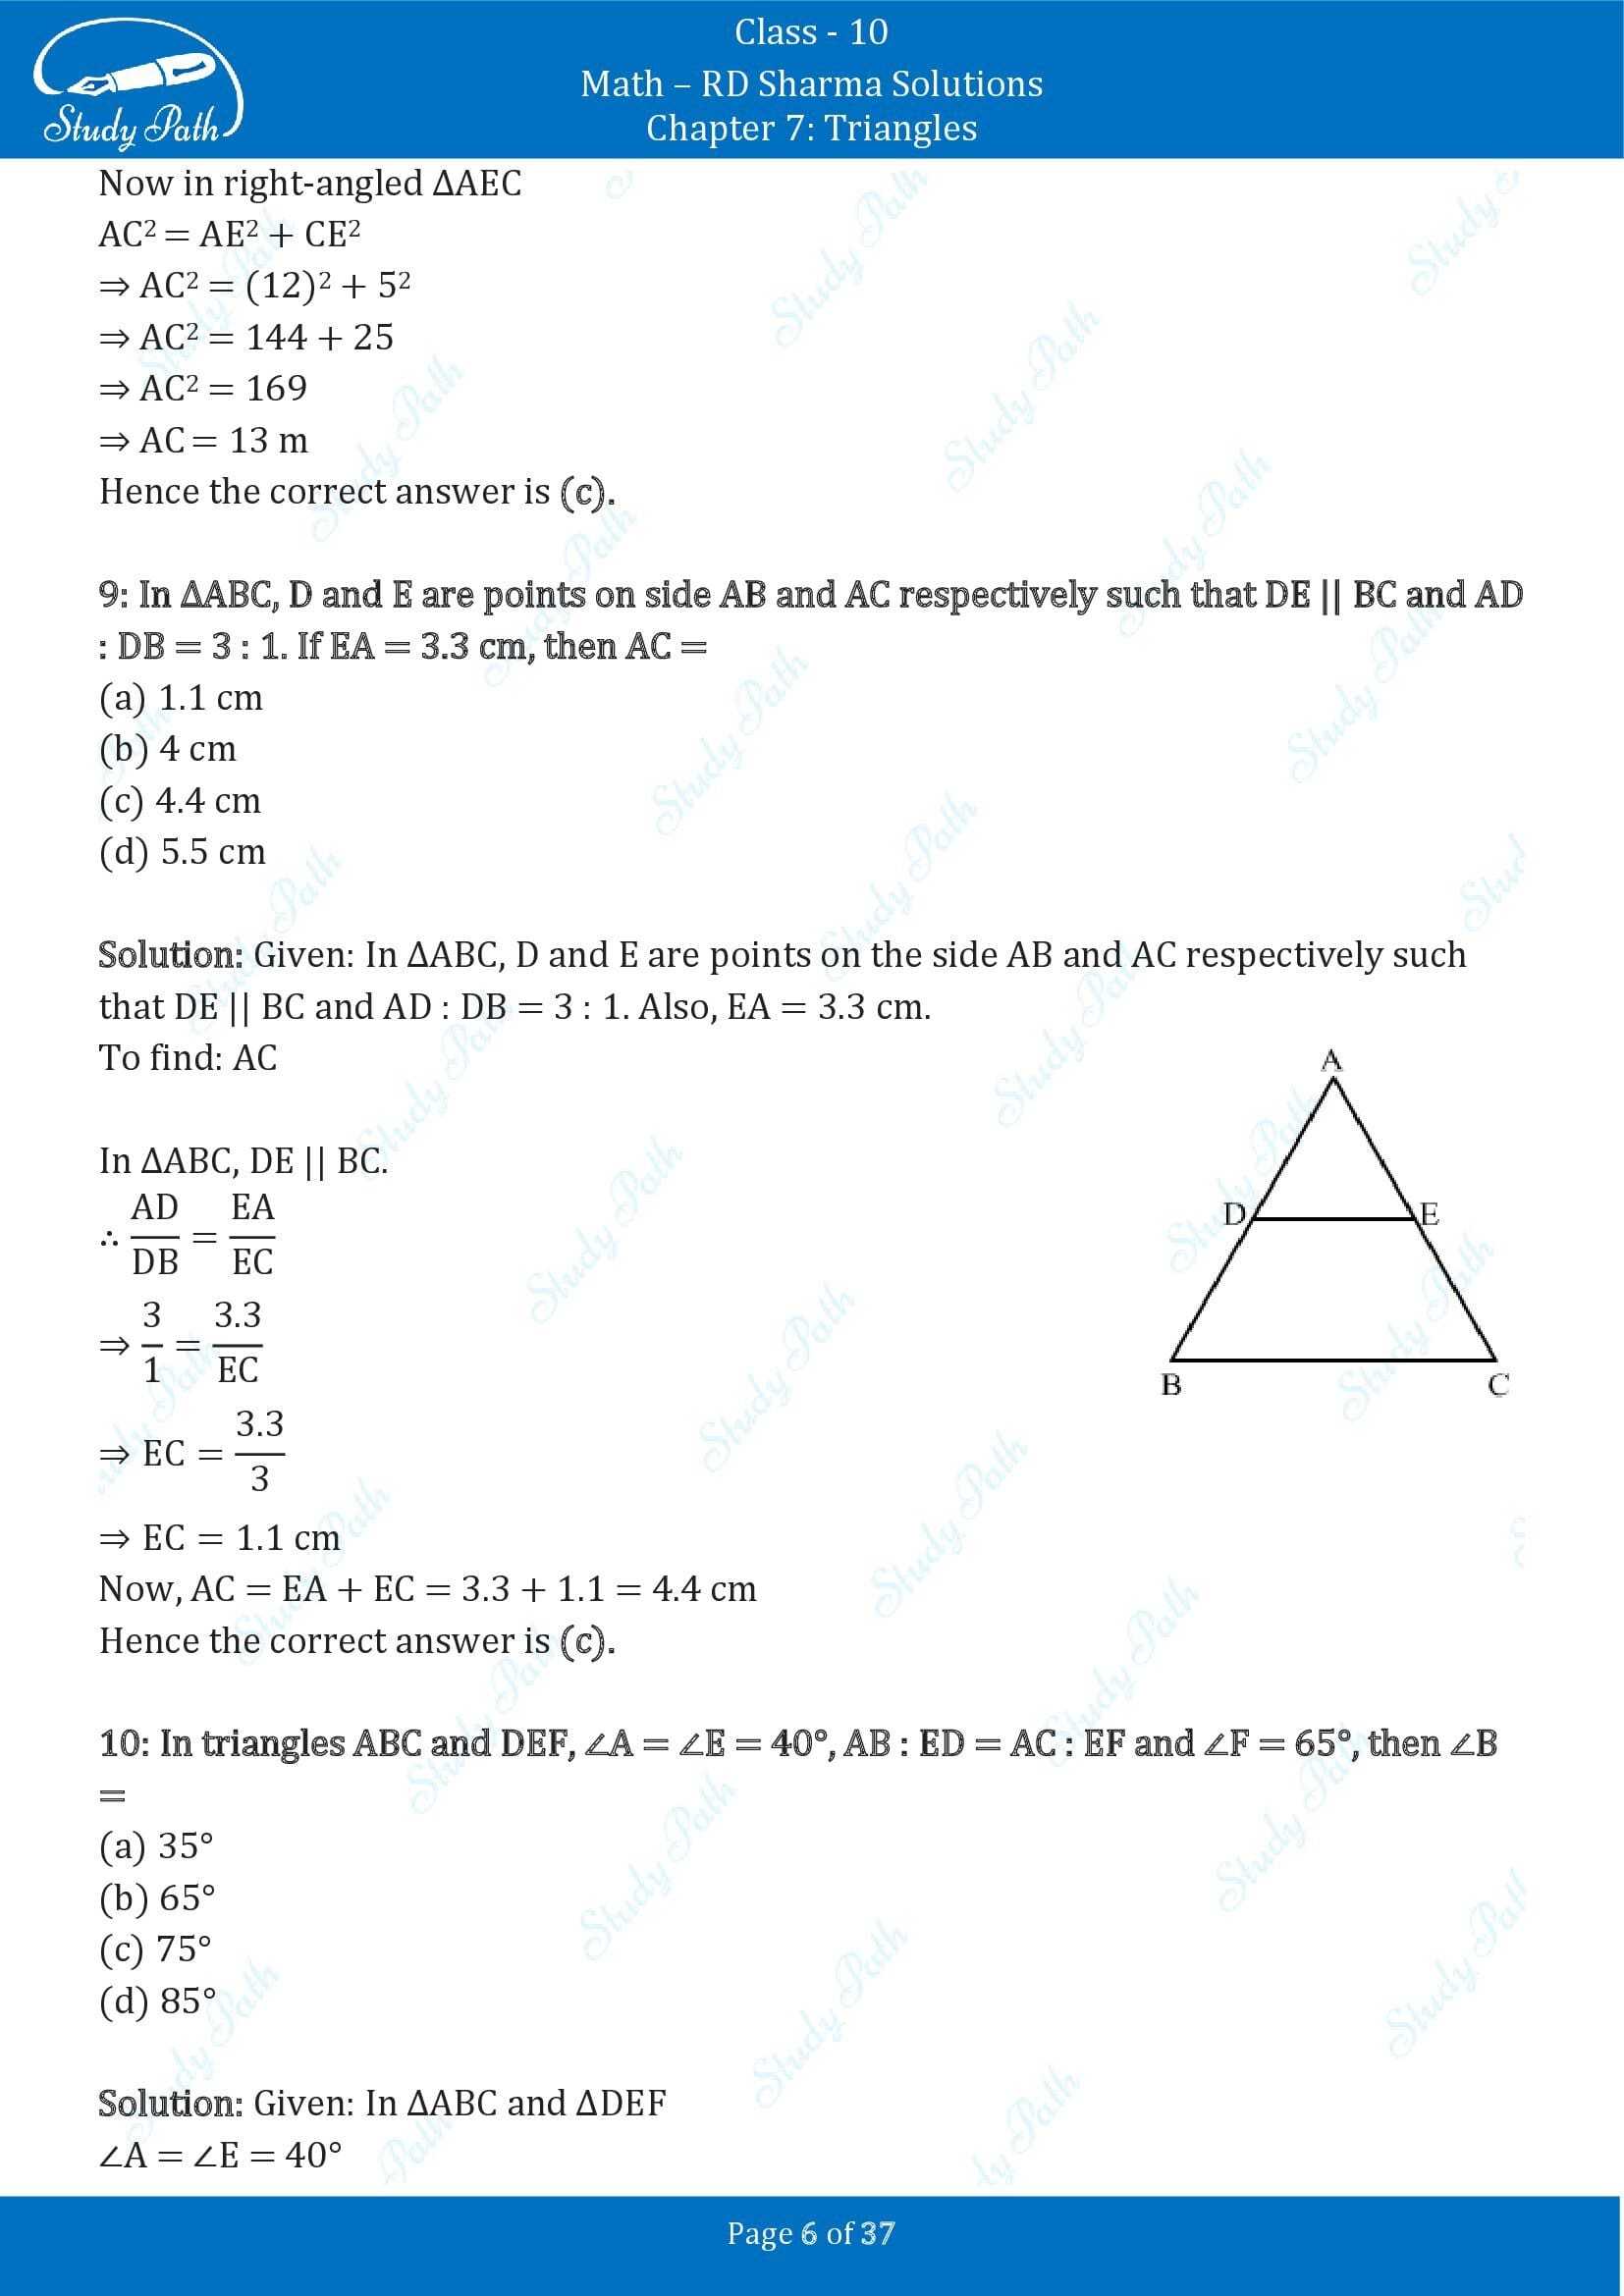 RD Sharma Solutions Class 10 Chapter 7 Triangles Multiple Choice Question MCQs 00006